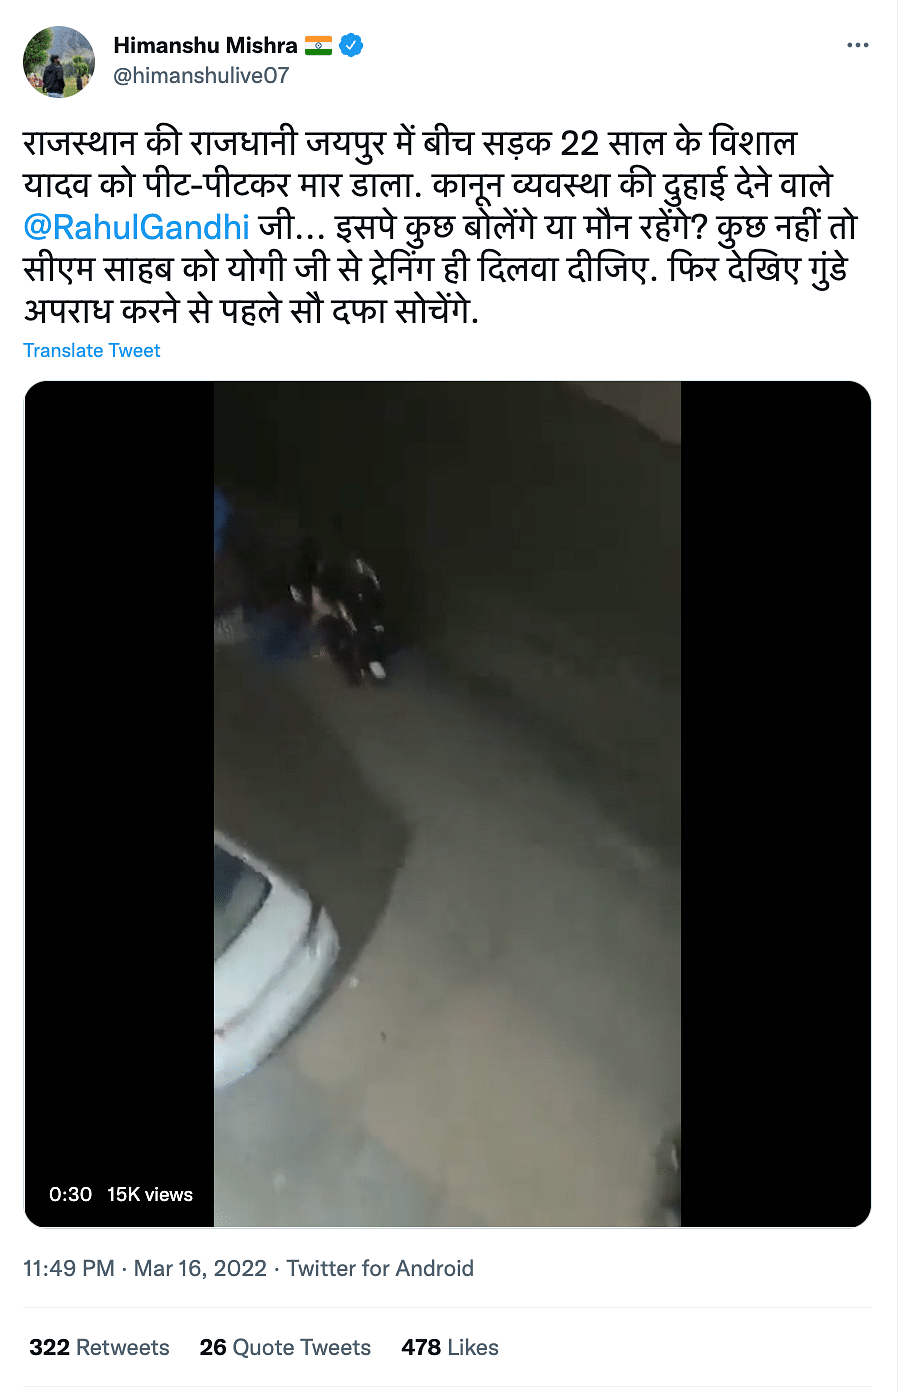 The video shows a violent fight between hotel staff and guests in Vaishali Nagar in Rajasthan's Jaipur.